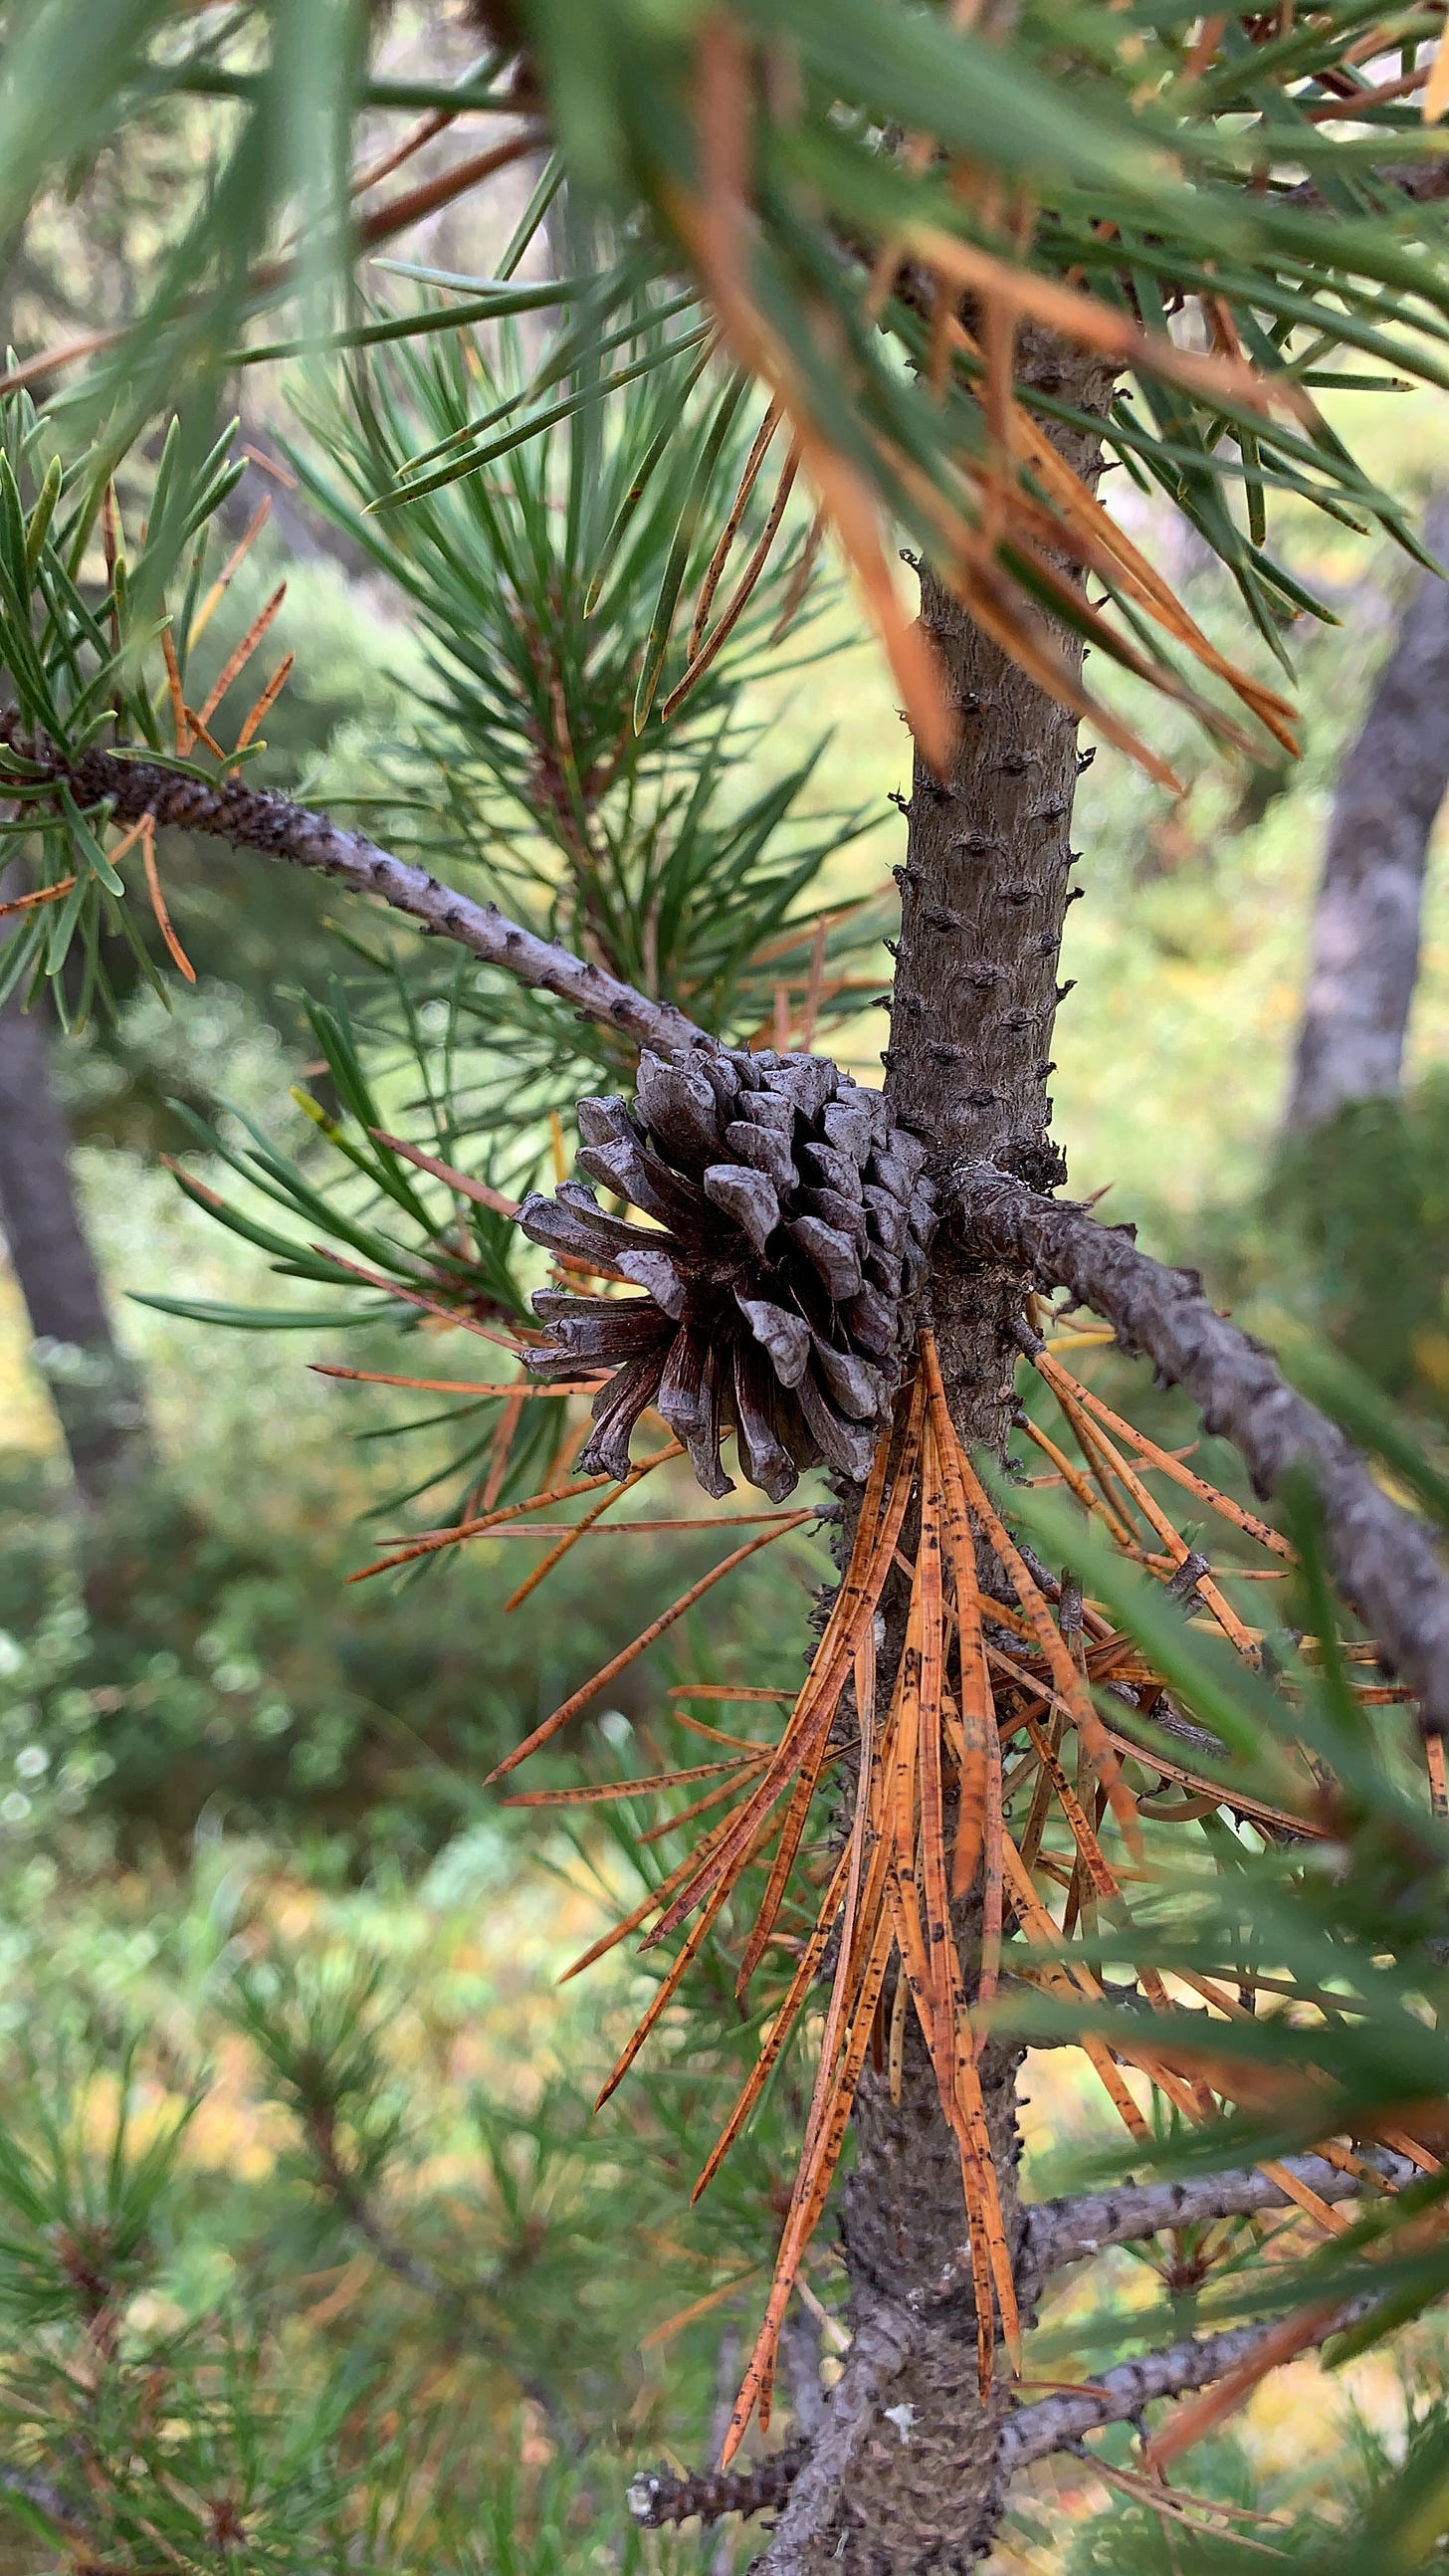 A pine cone and brown needles